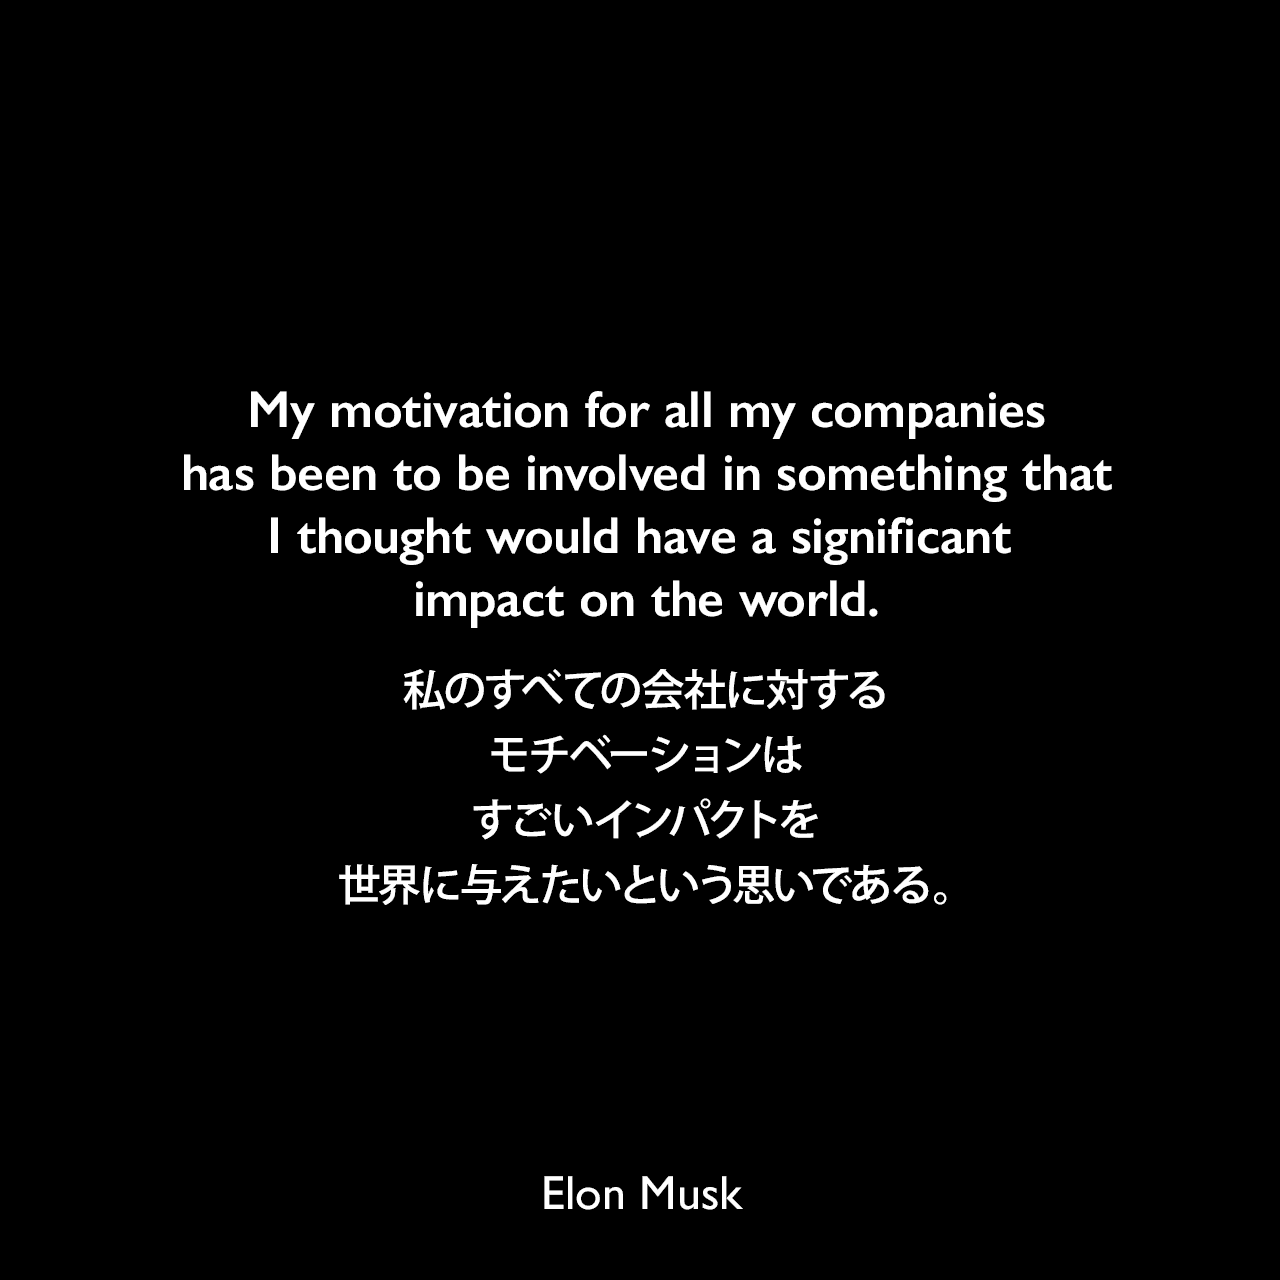 My motivation for all my companies has been to be involved in something that I thought would have a significant impact on the world.私のすべての会社に対するモチベーションは、すごいインパクトを世界に与えたいという思いである。Elon Musk